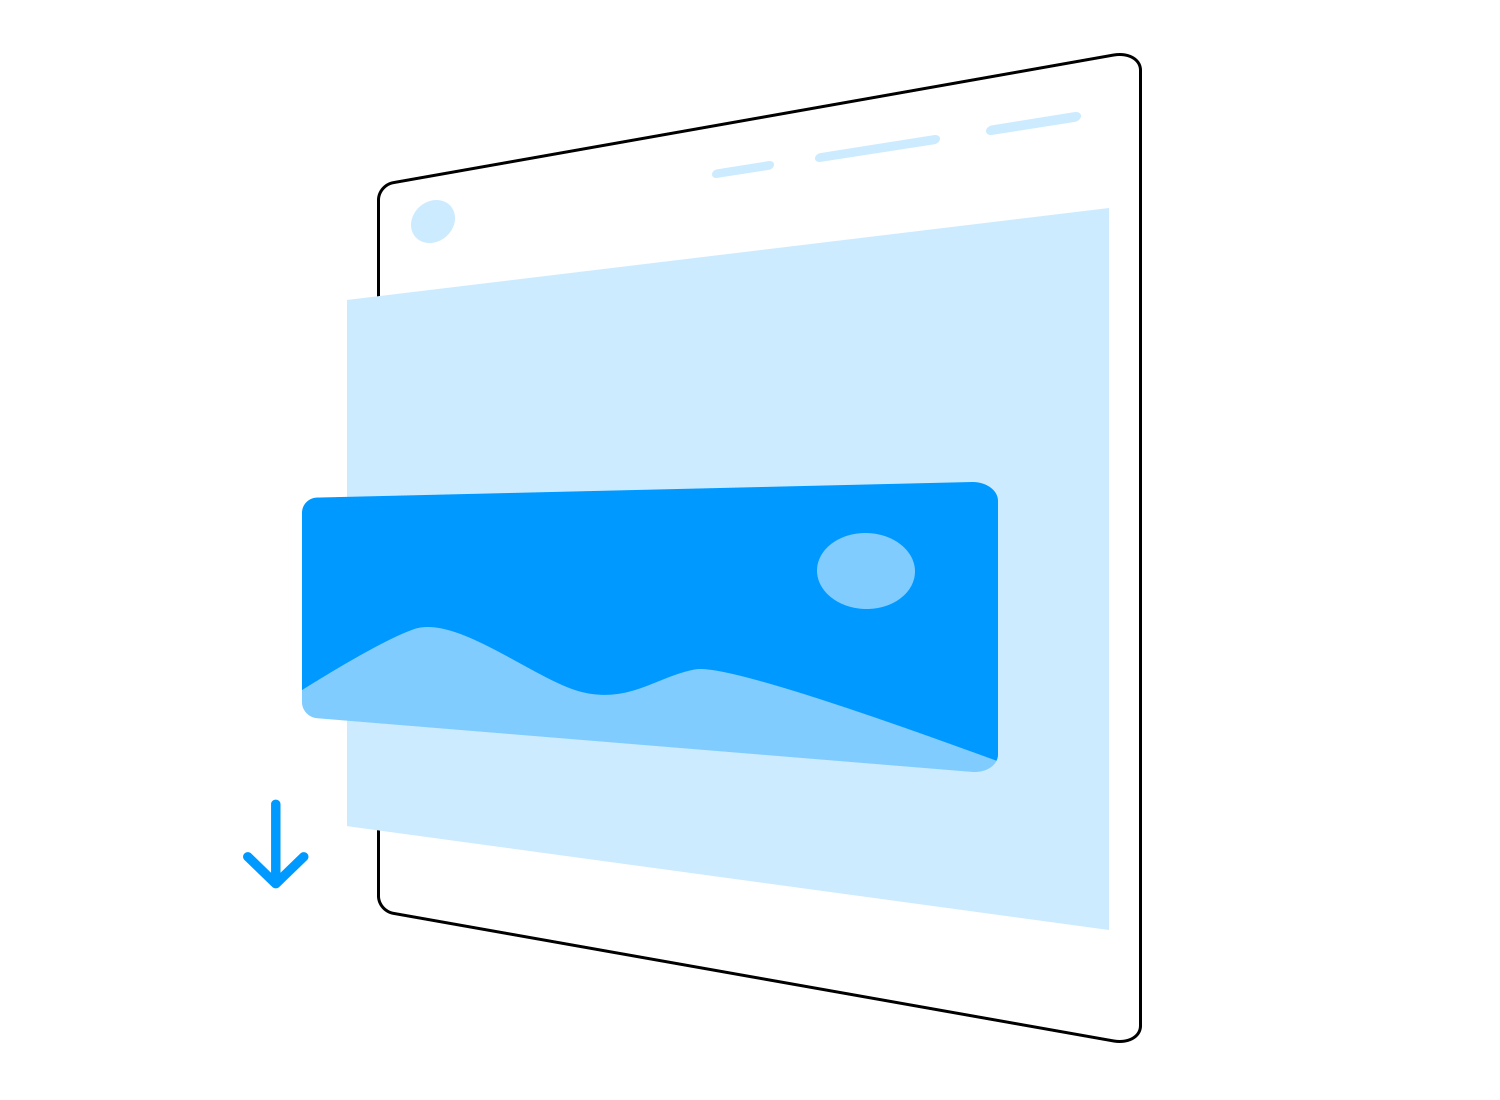 Illustration of parallax scrolling navigation with layered elements creating a sense of depth